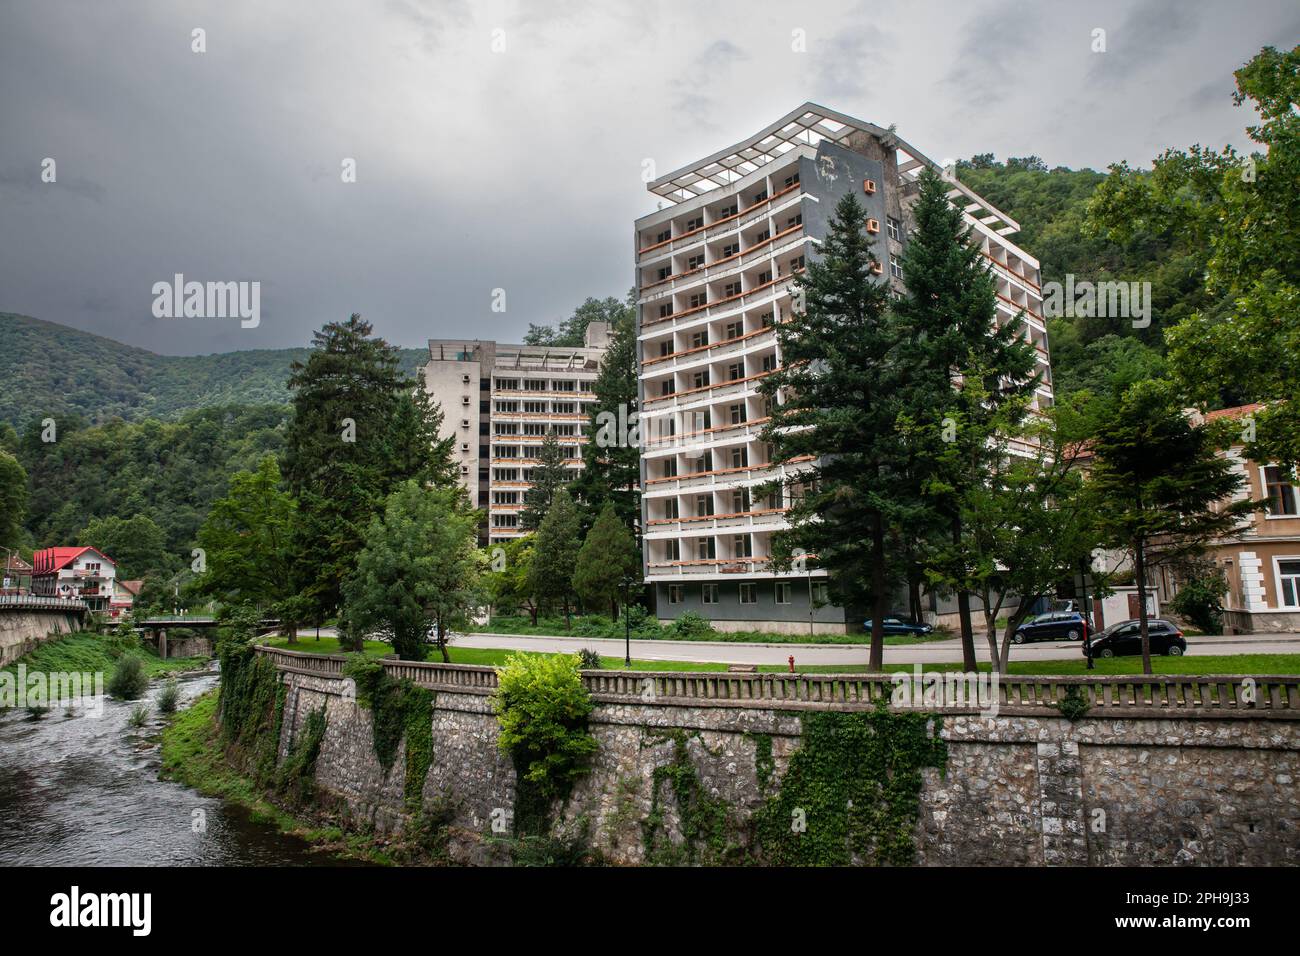 Picture of an abandoned hotel in baile Herculane. it's a socialist architecture resort in the city of baile herculane. Băile Herculane is a spa town i Stock Photo